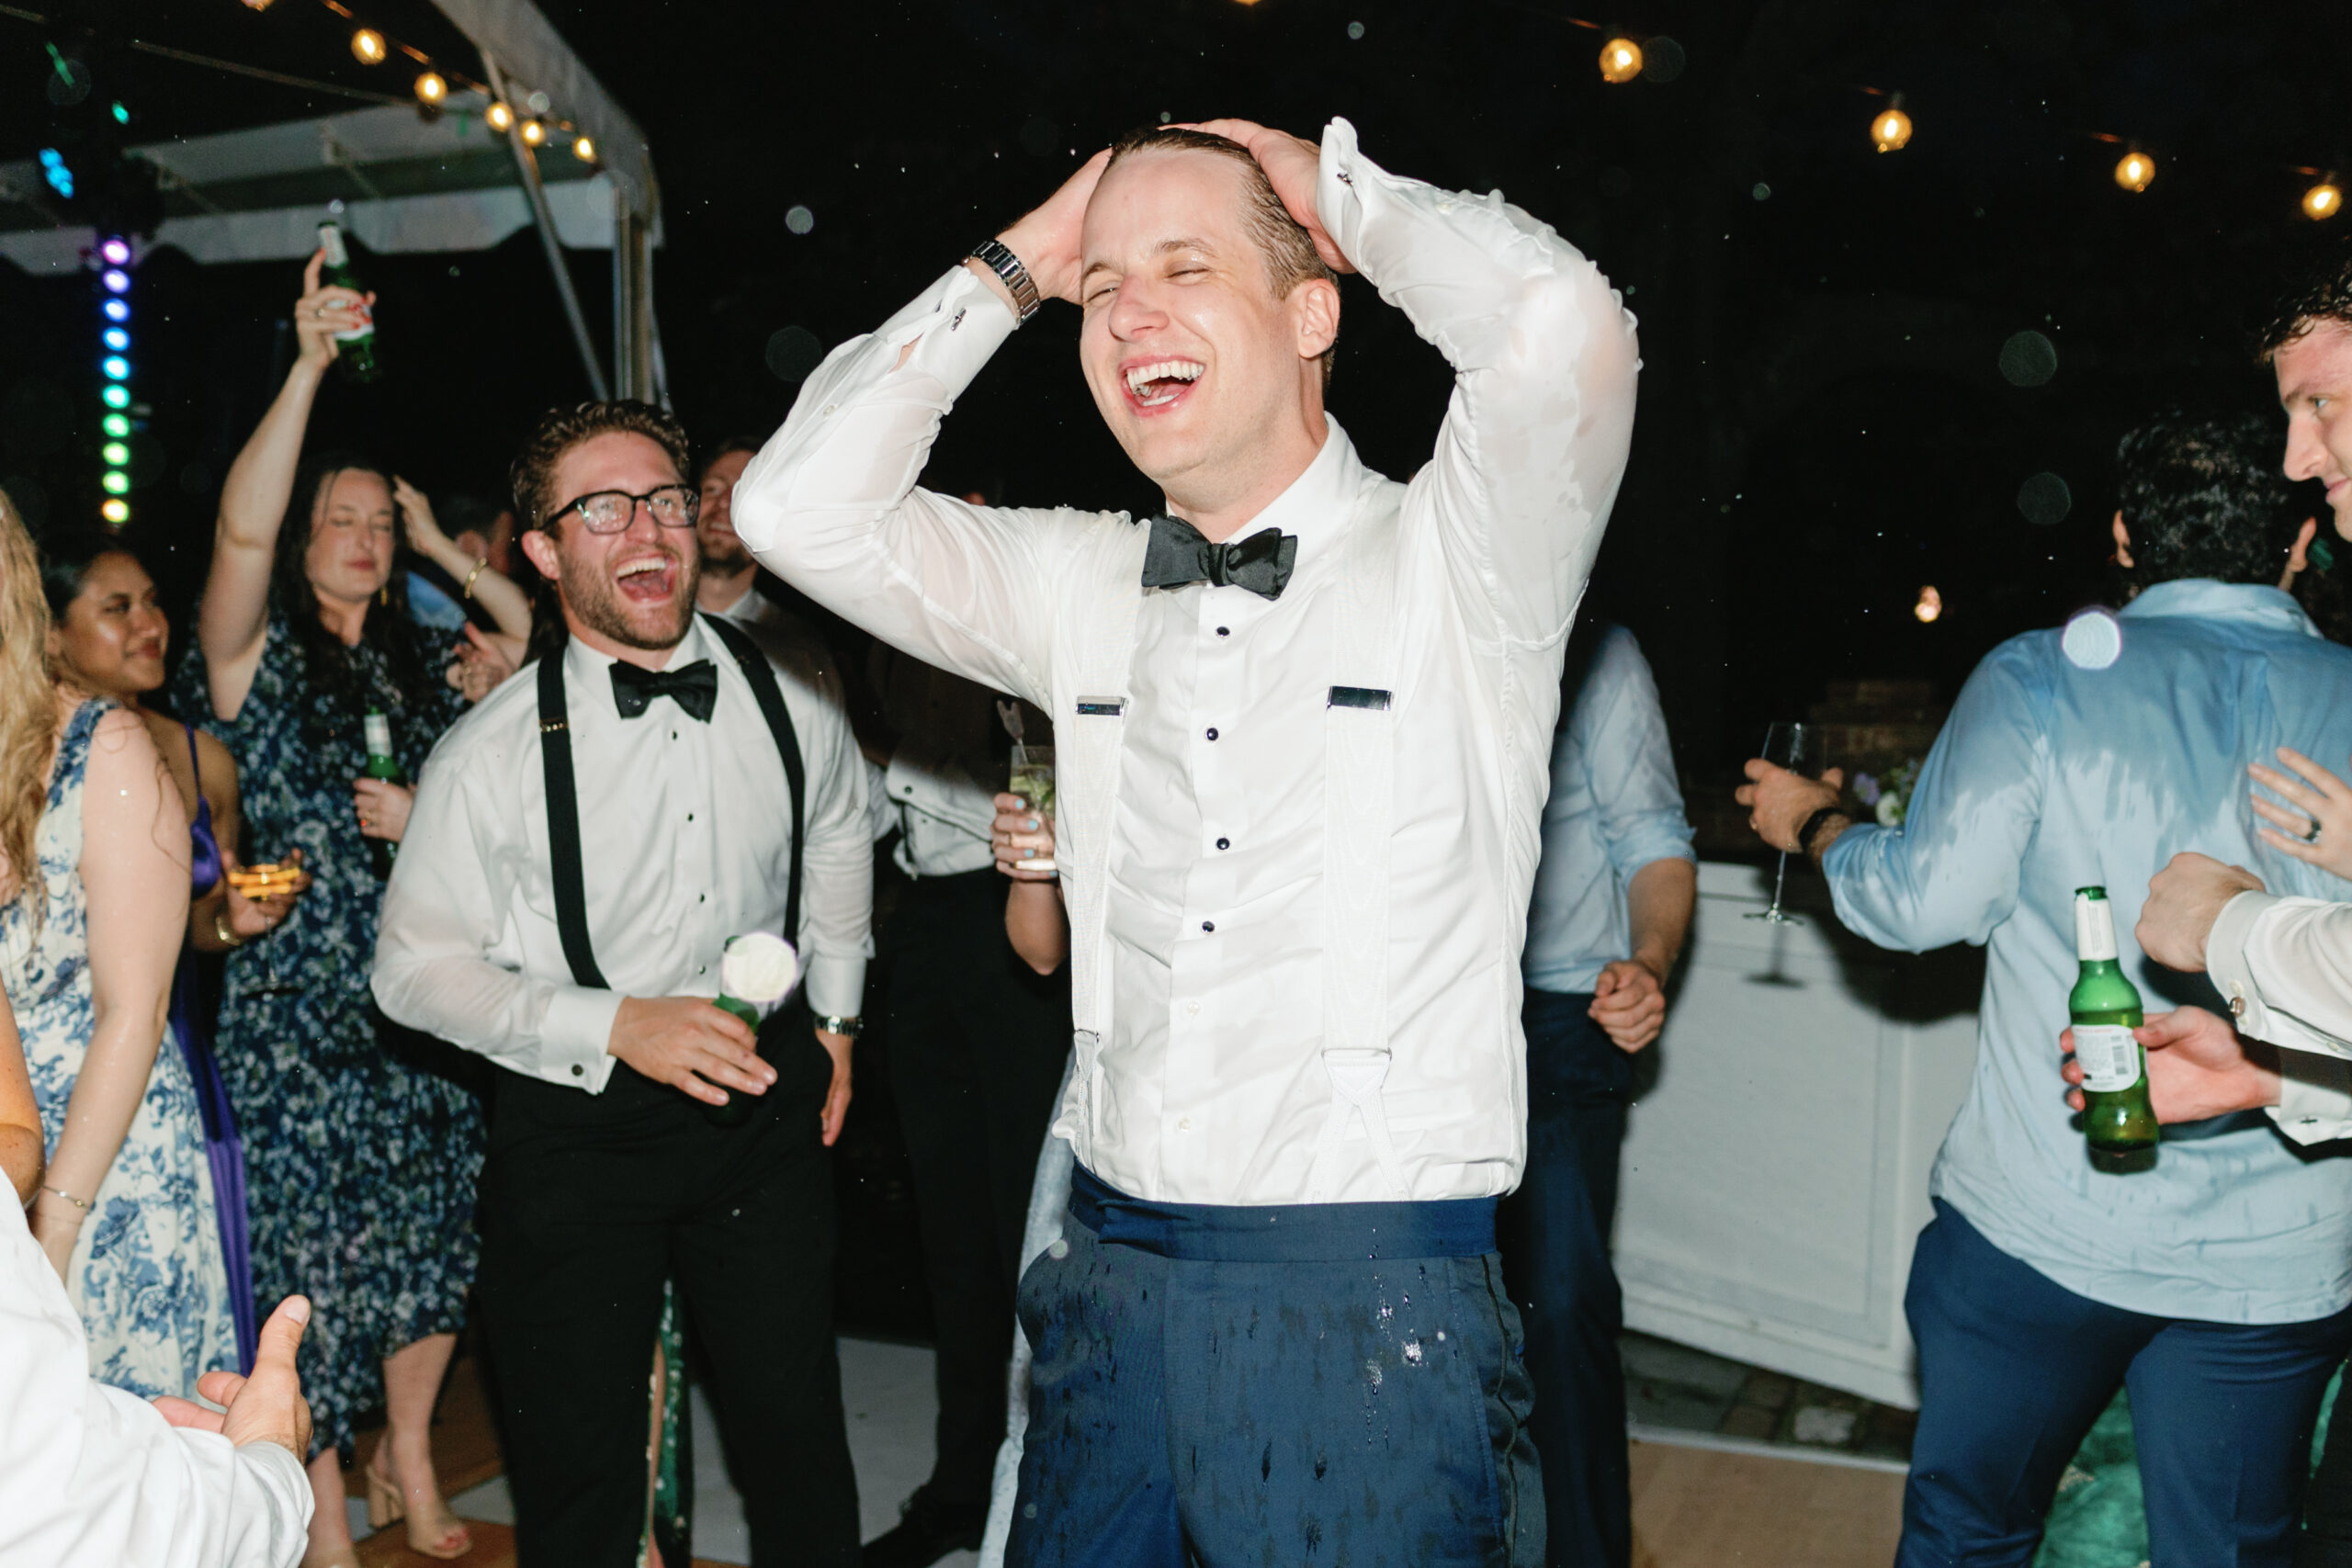 Elated groom on the dance floor. White suspenders and black bow tie. 